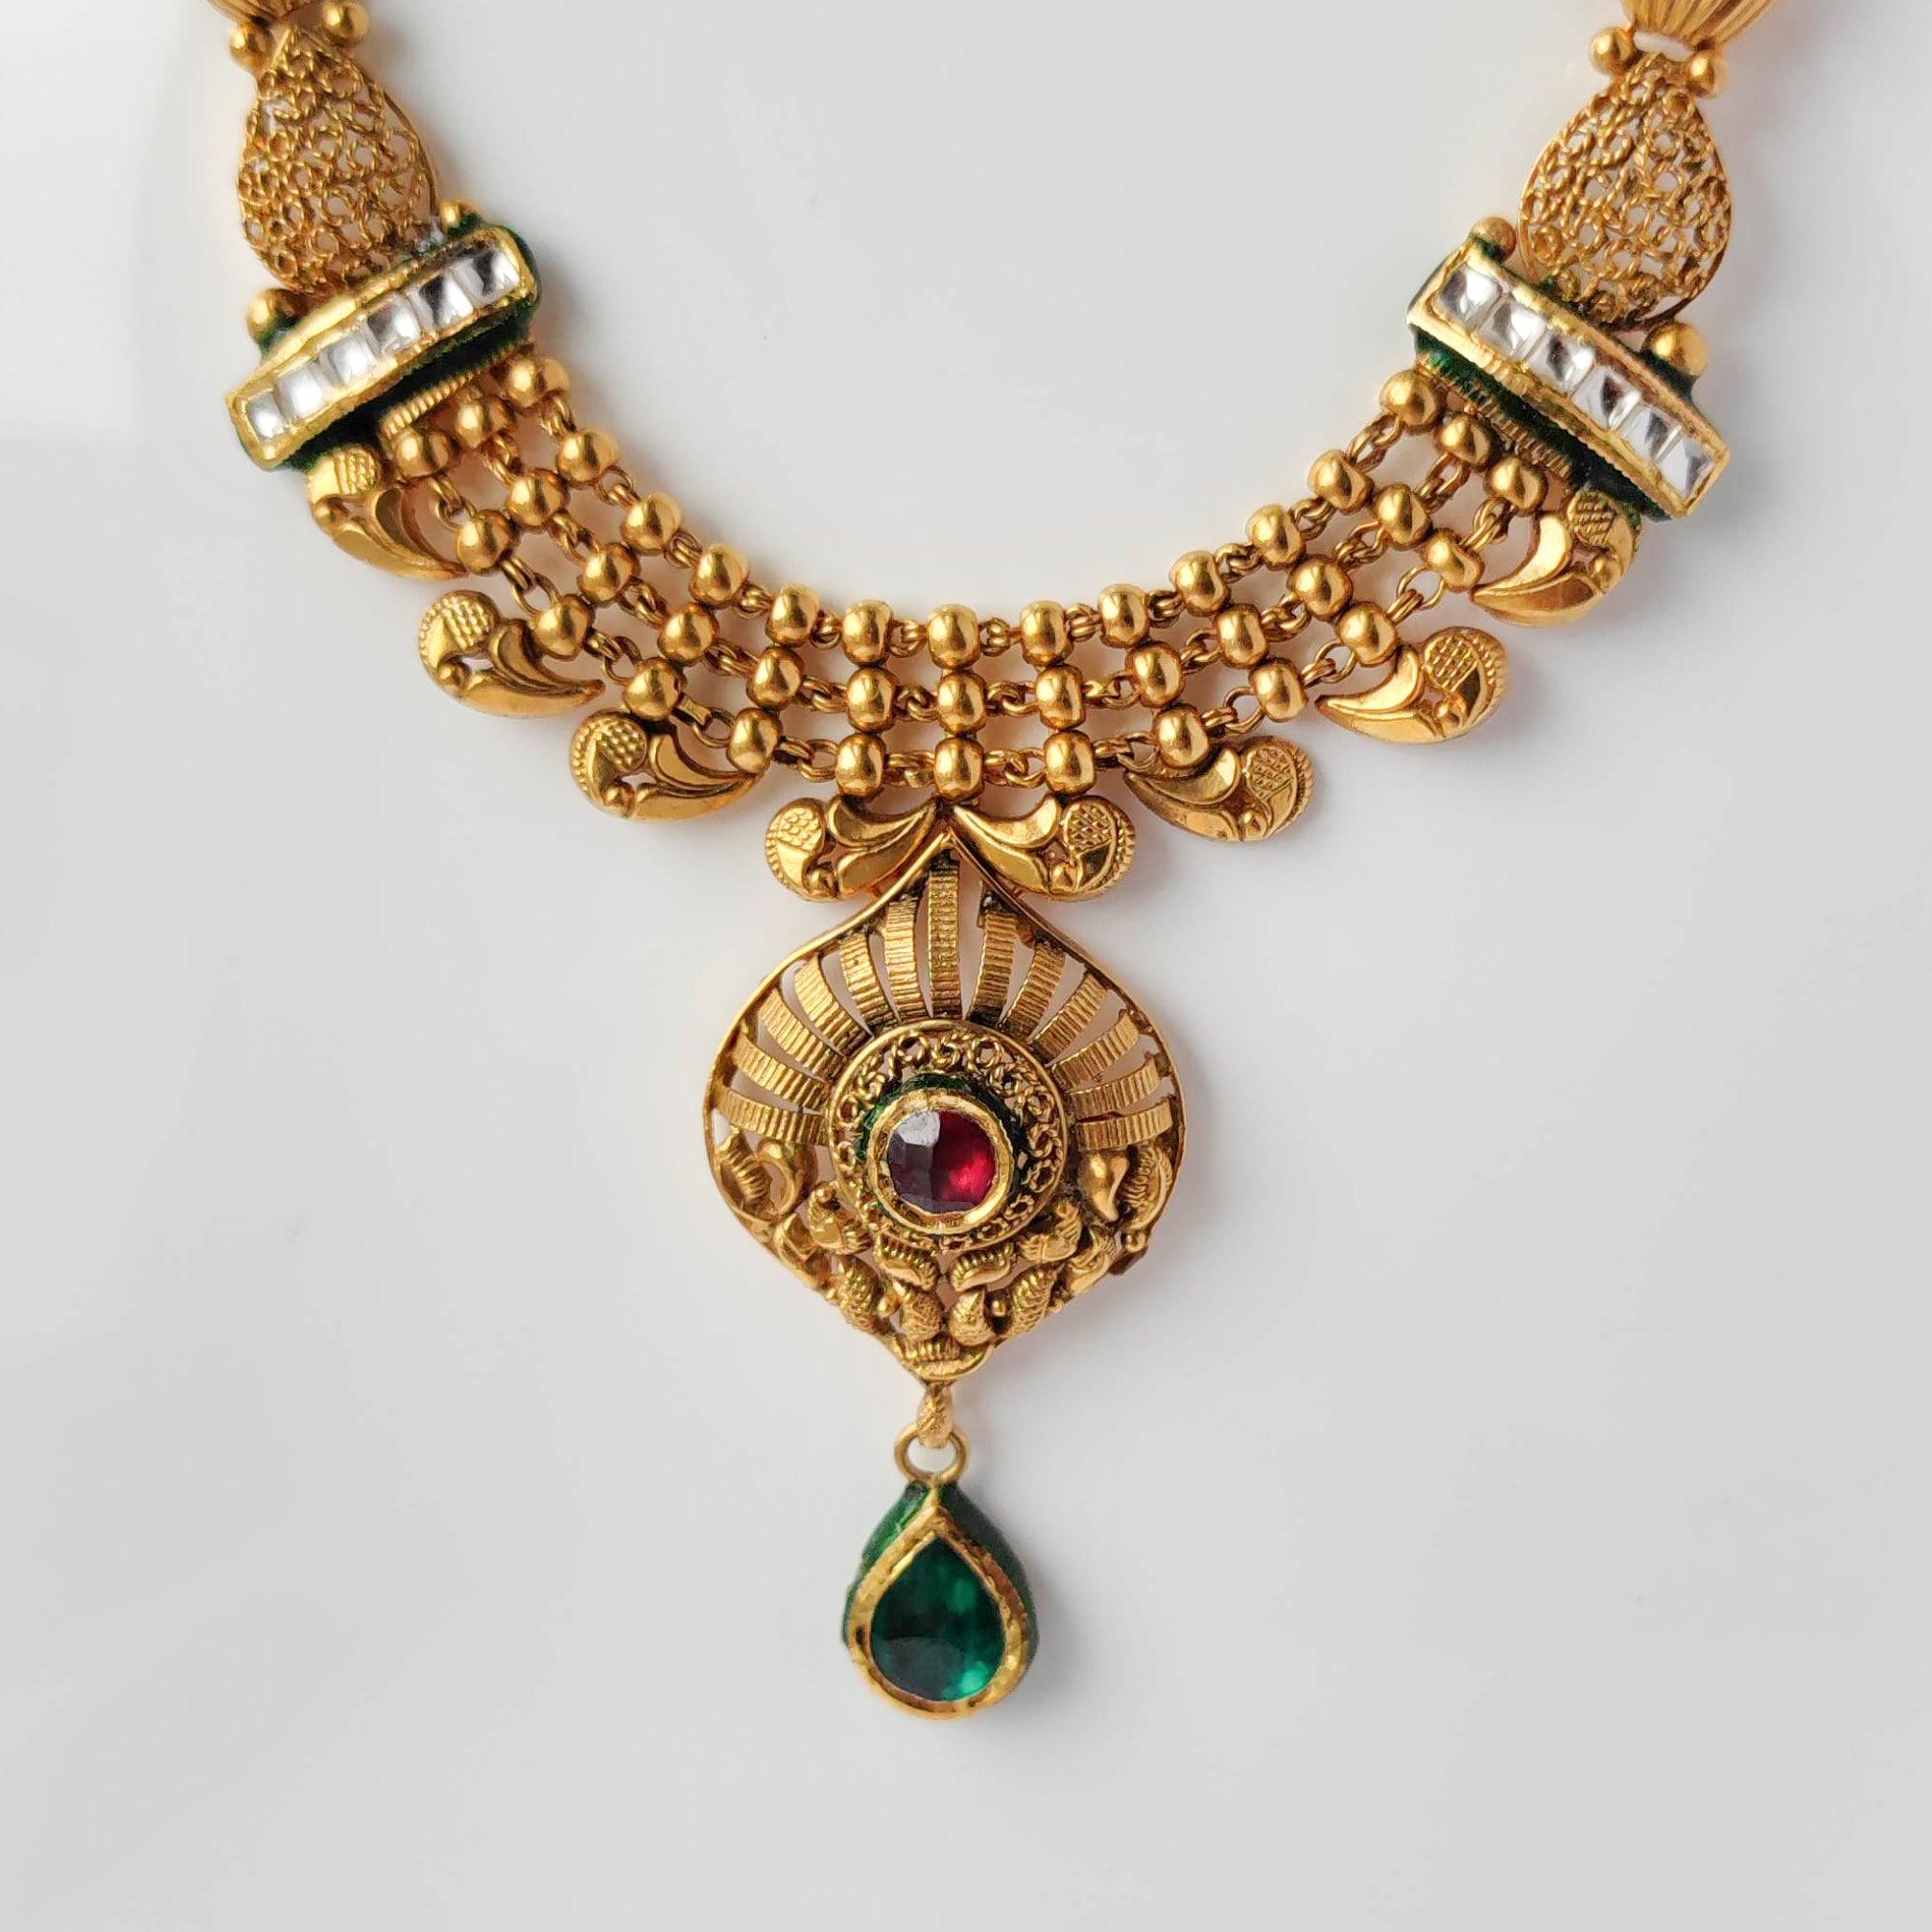 22ct Gold Antiquated Look Necklace set with Green, Red and White Polki Style Cubic Zirconia Stones (42.4g) N&E-8206